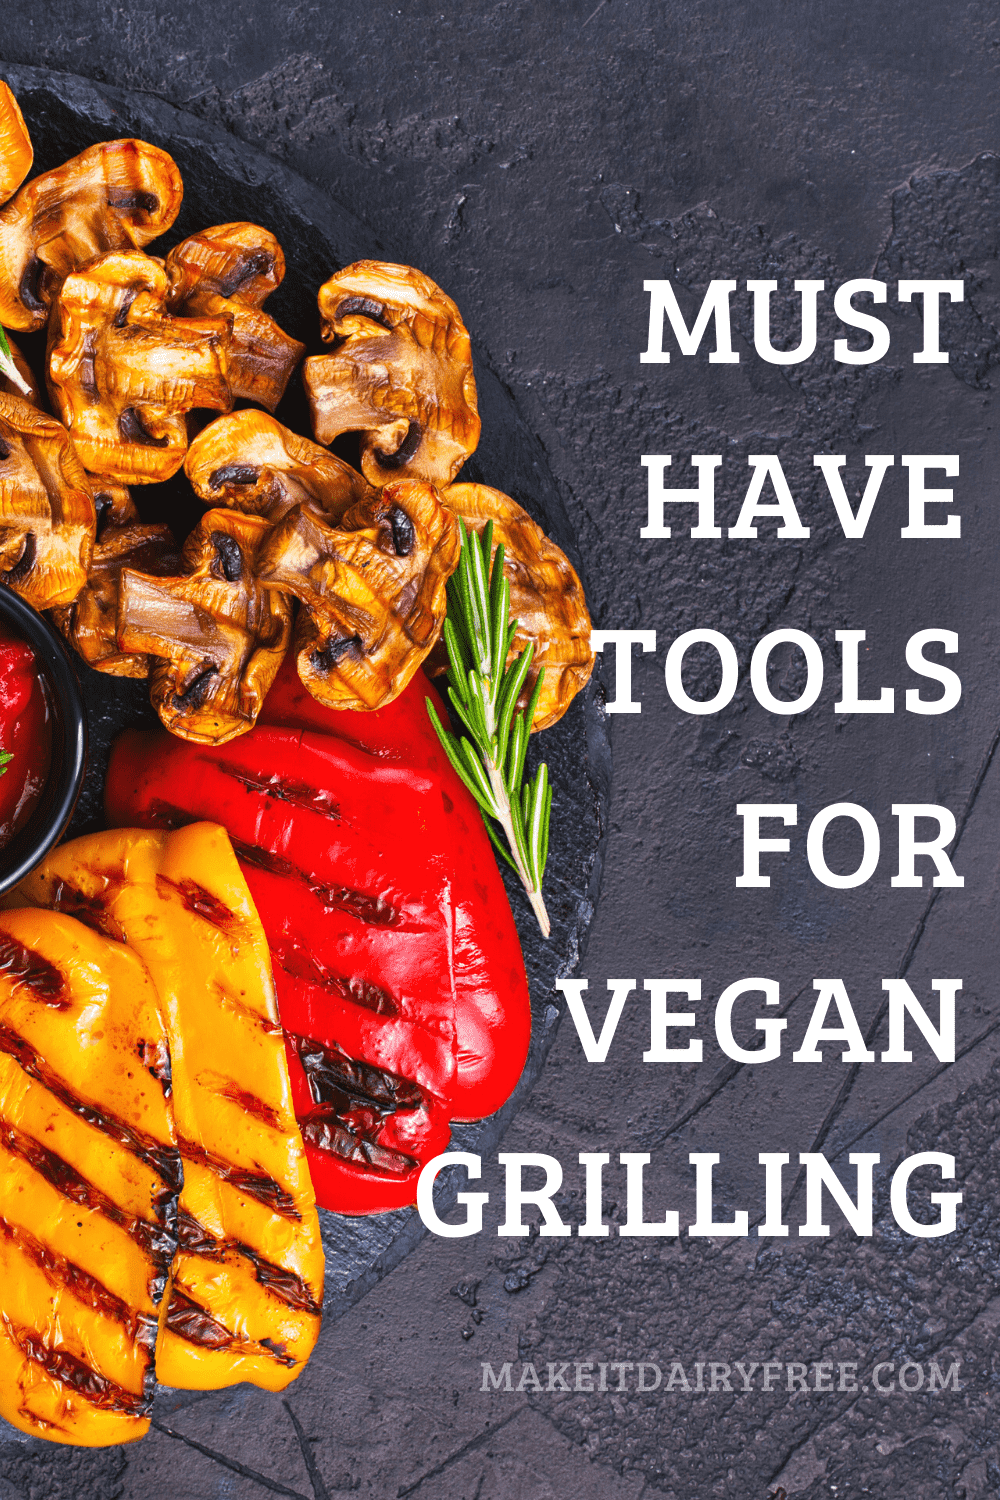 https://makeitdairyfree.com/wp-content/uploads/2021/05/must-have-tools-for-vegan-grilling.png